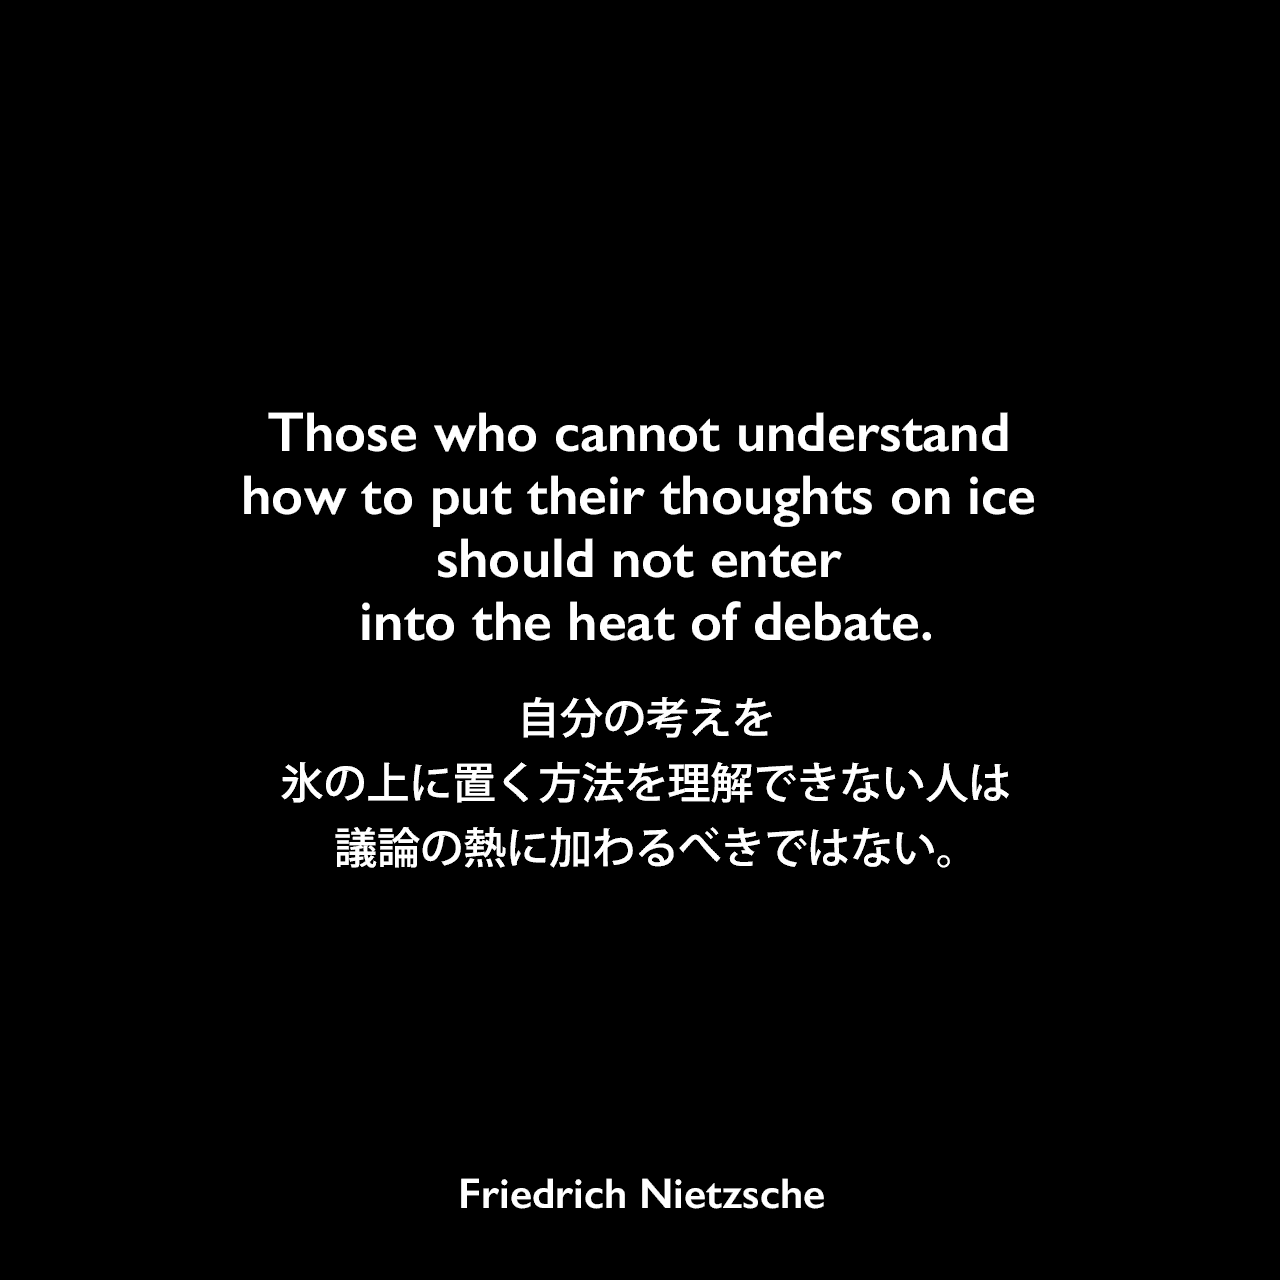 Those who cannot understand how to put their thoughts on ice should not enter into the heat of debate.自分の考えを氷の上に置く方法を理解できない人は、議論の熱に加わるべきではない。- ニーチェの本「Human, All Too Human」よりFriedrich Nietzsche